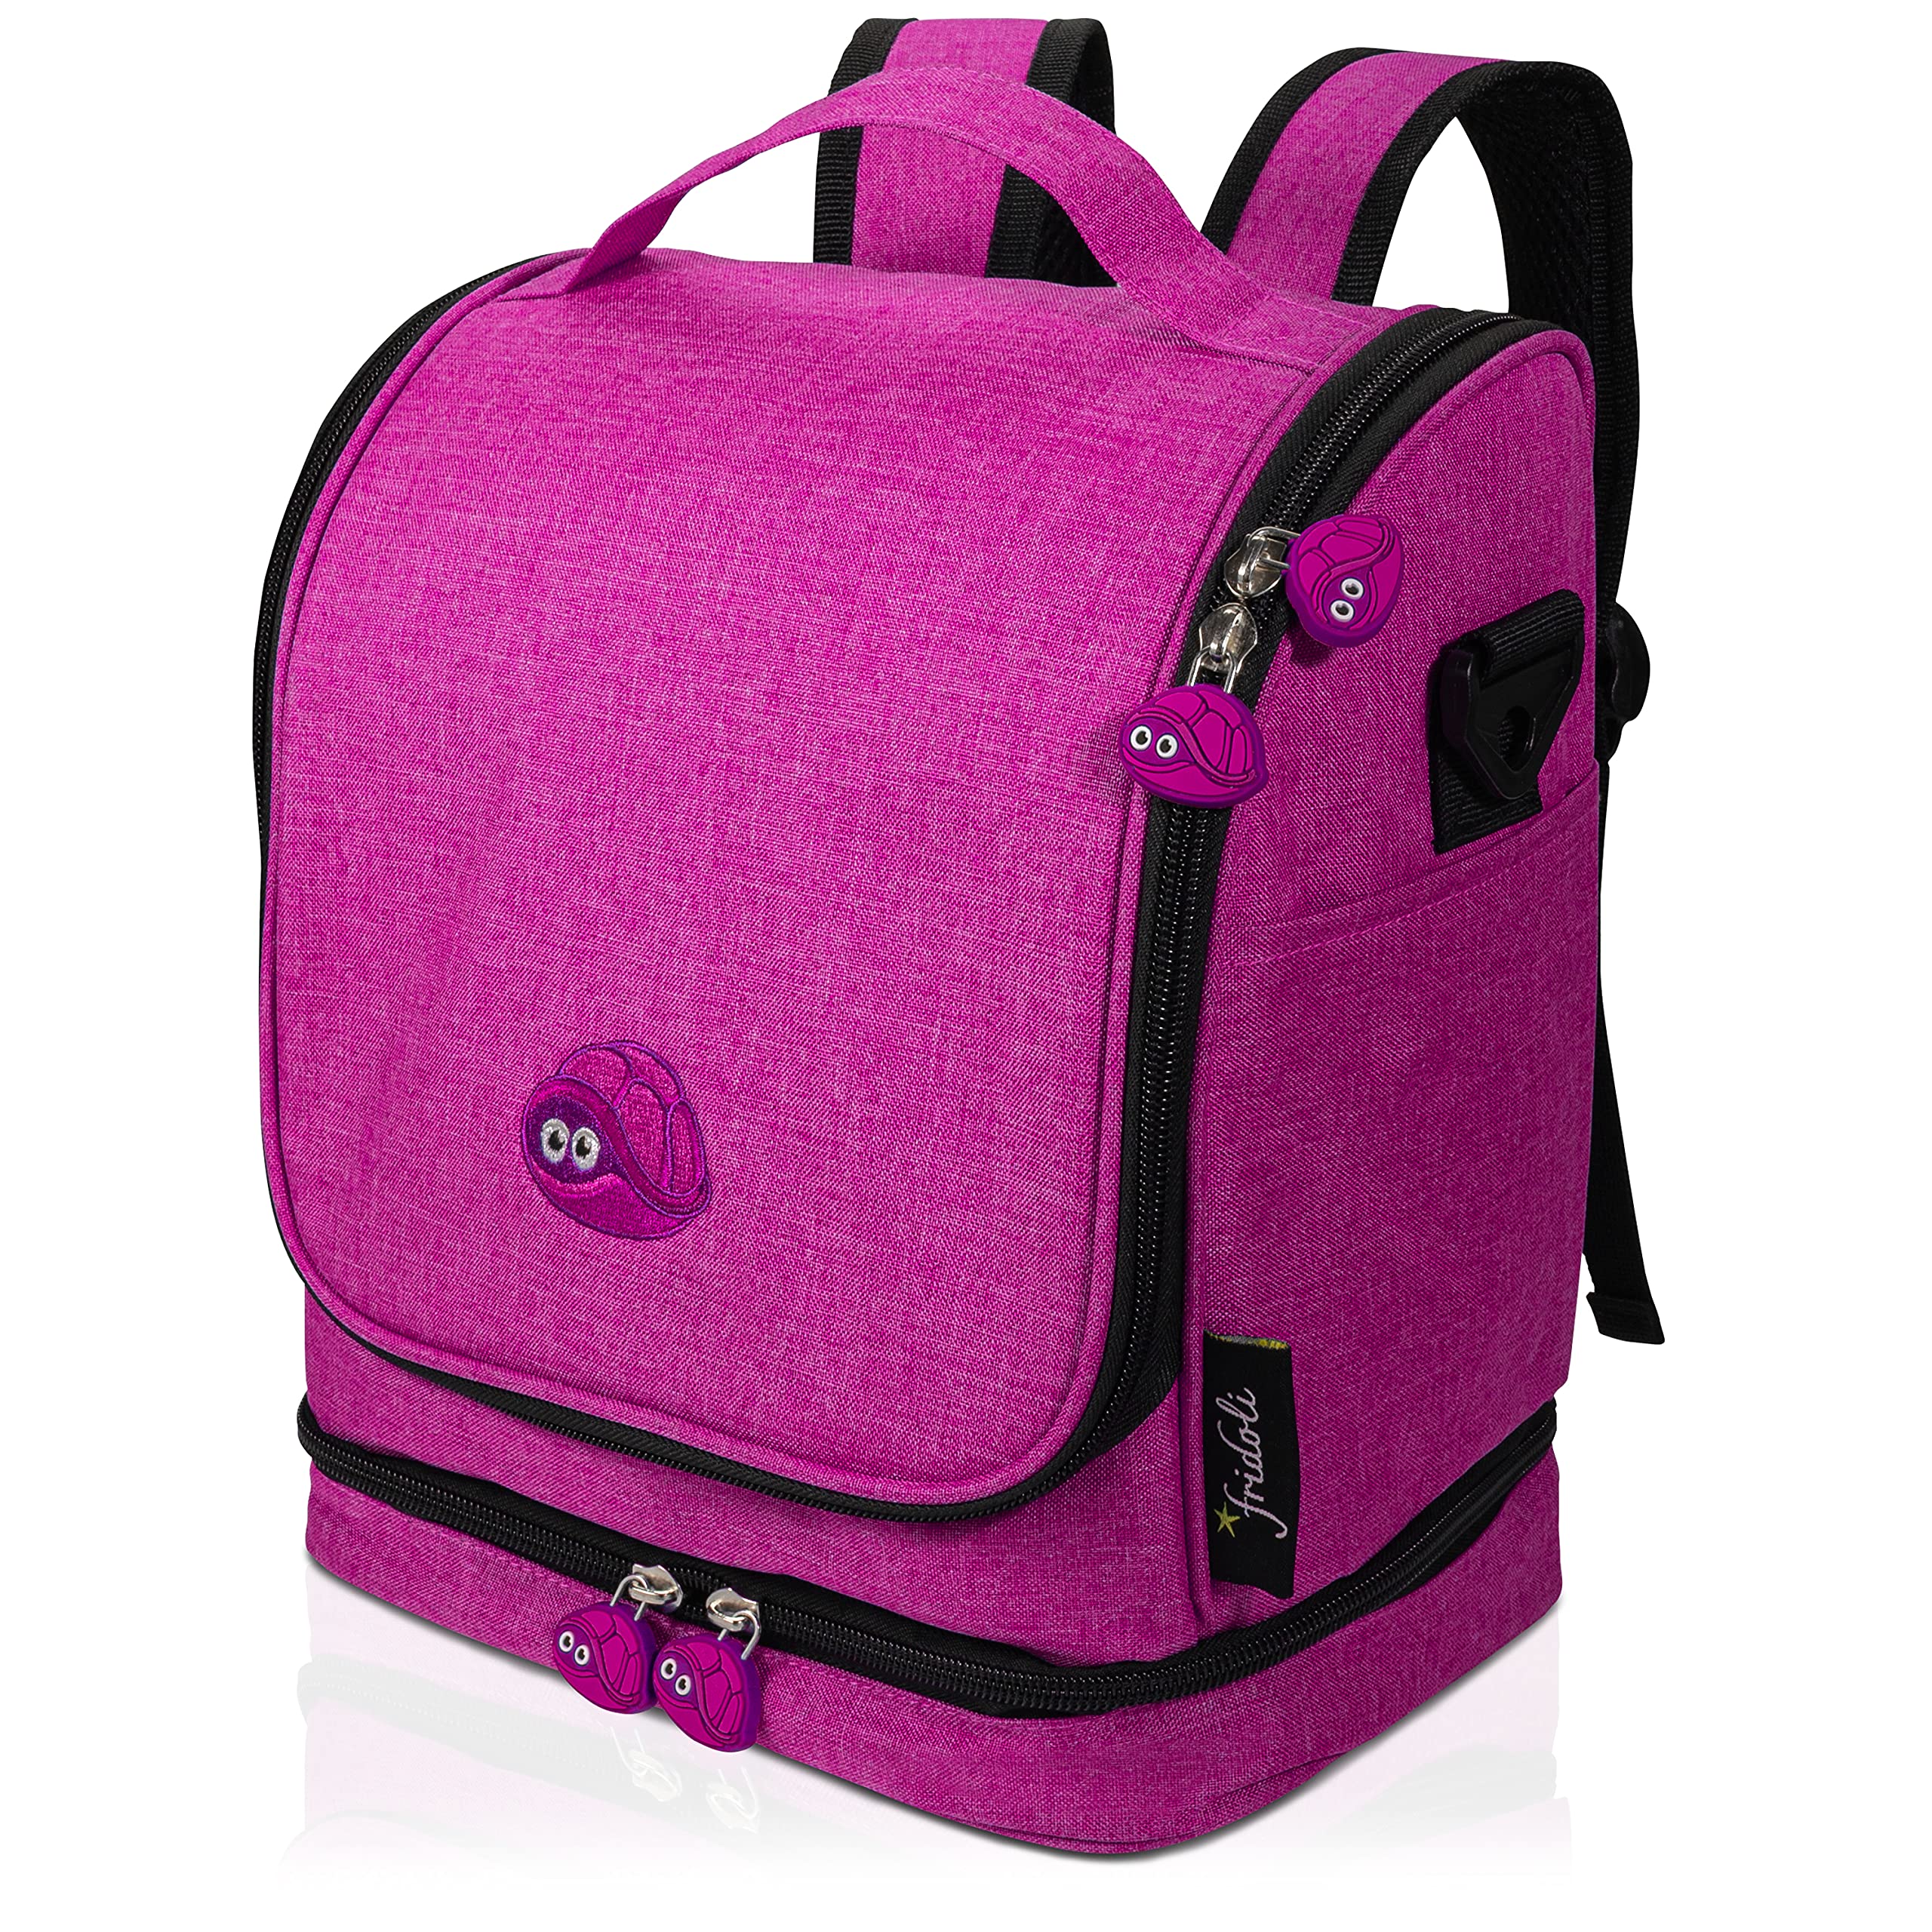 fridoli Bag for Toniebox and Accessories - Children's Backpack (Berry)